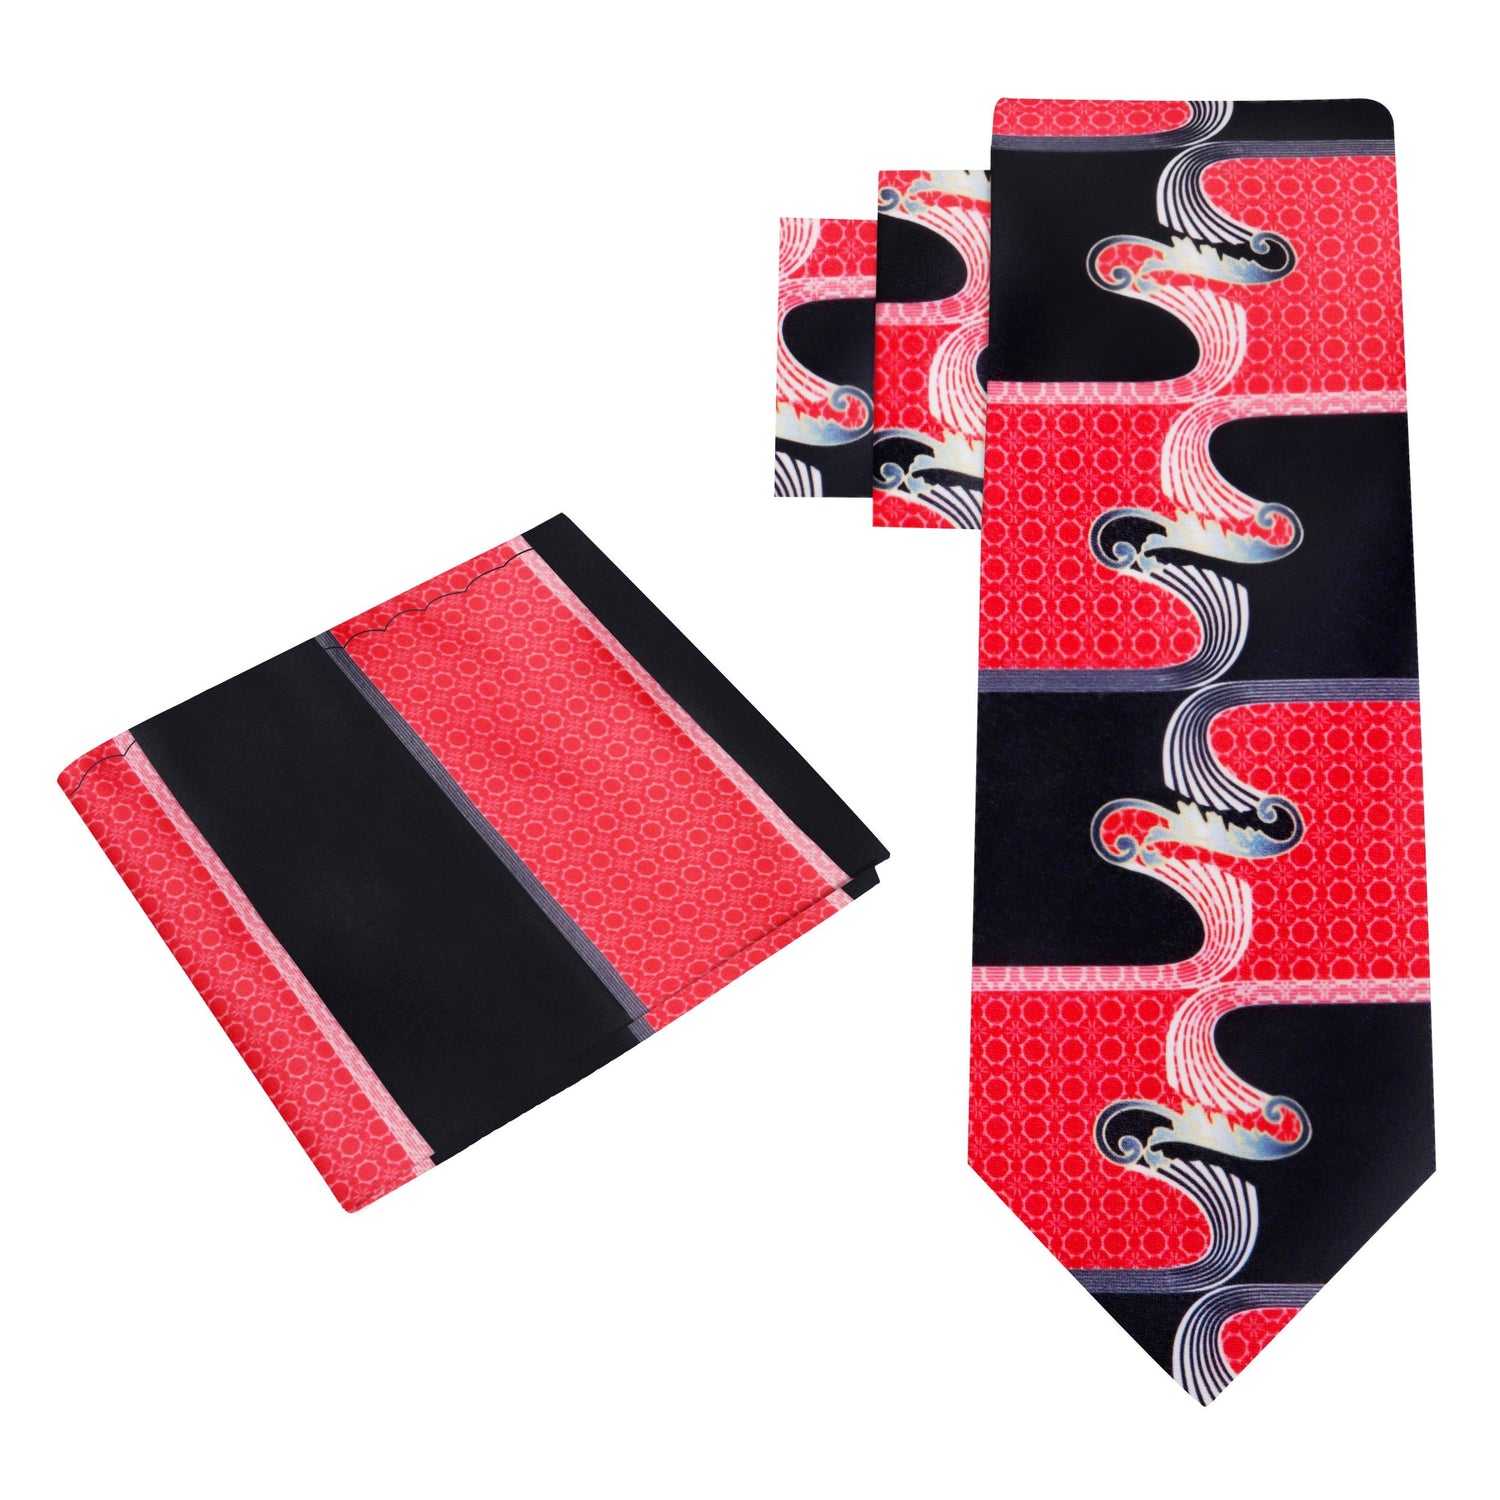 Alt View: Red Black Abstract Tie and Pocket Square